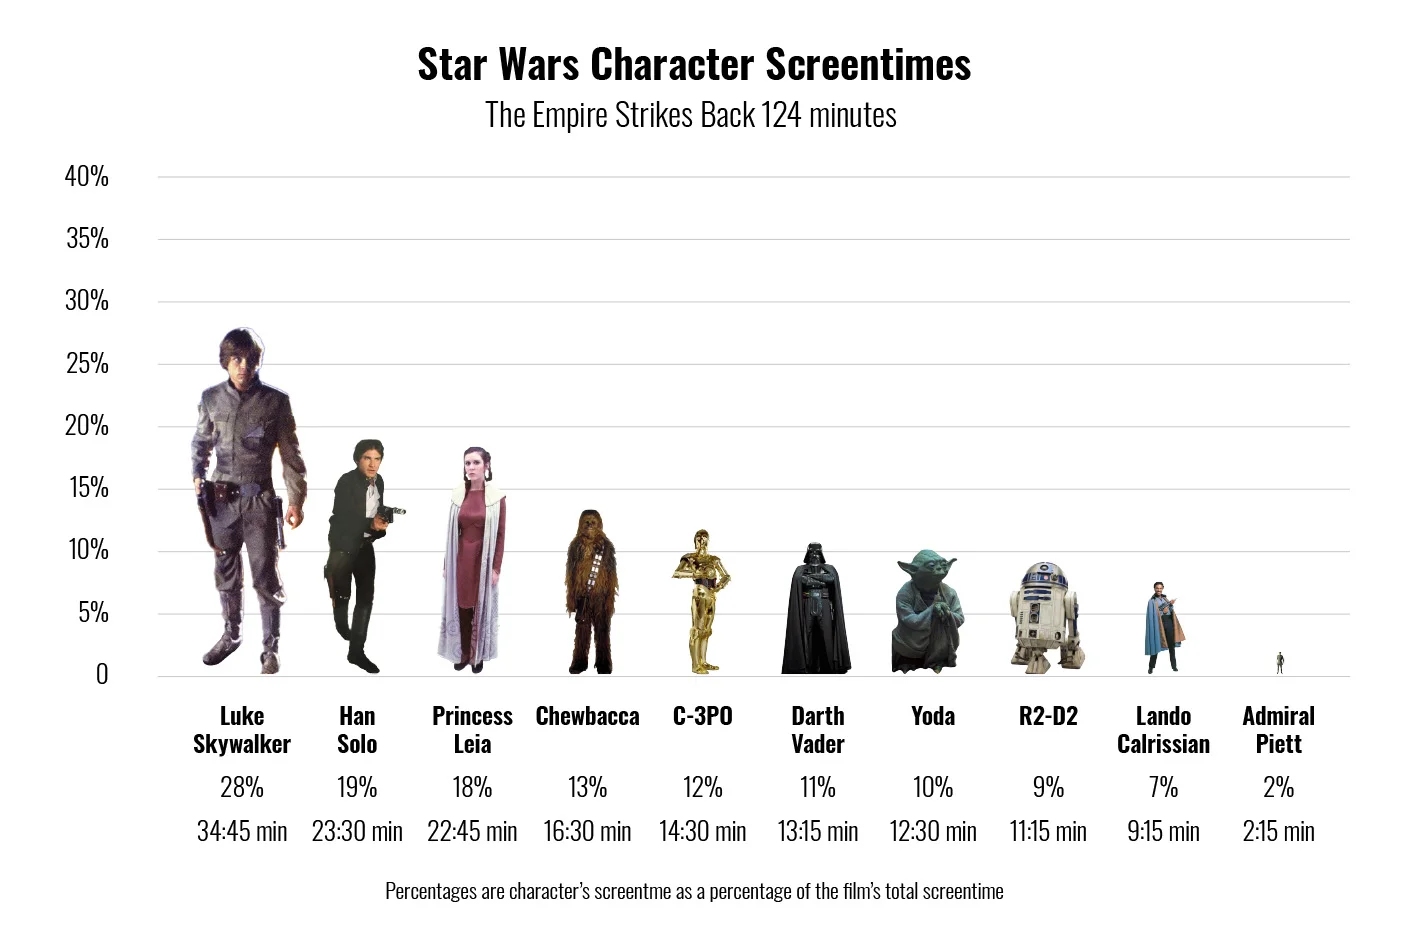 5-the-empire-strikes-back-character-screentimes